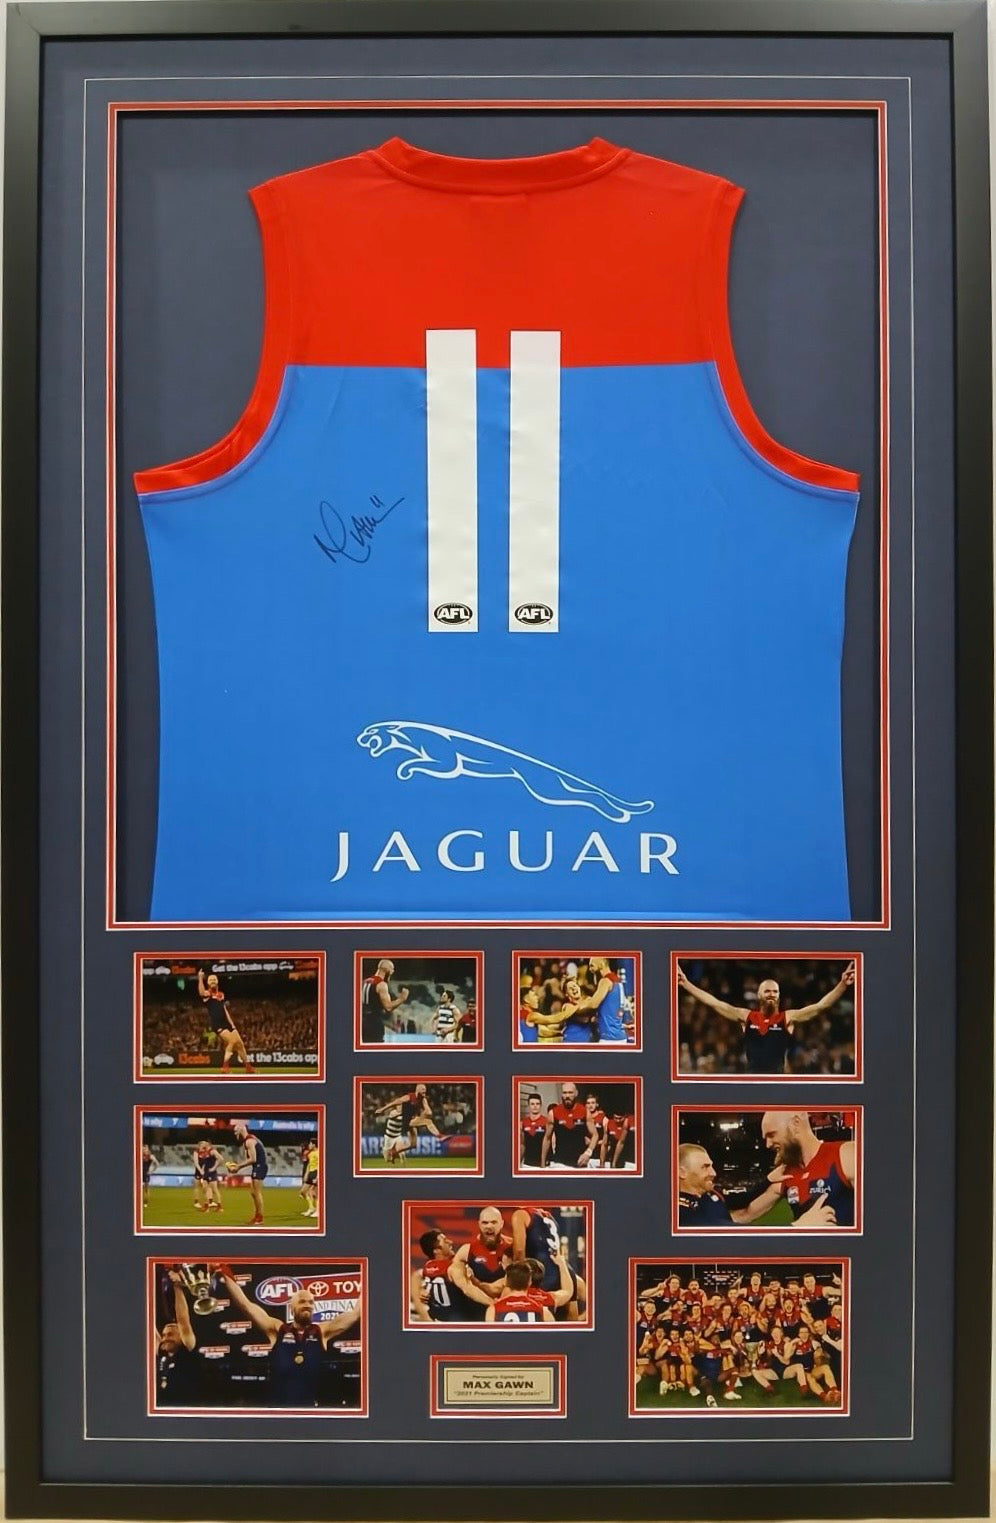 MAX GAWN Signed Guernsey & 2021 AFL Premiers Photo Collage Display